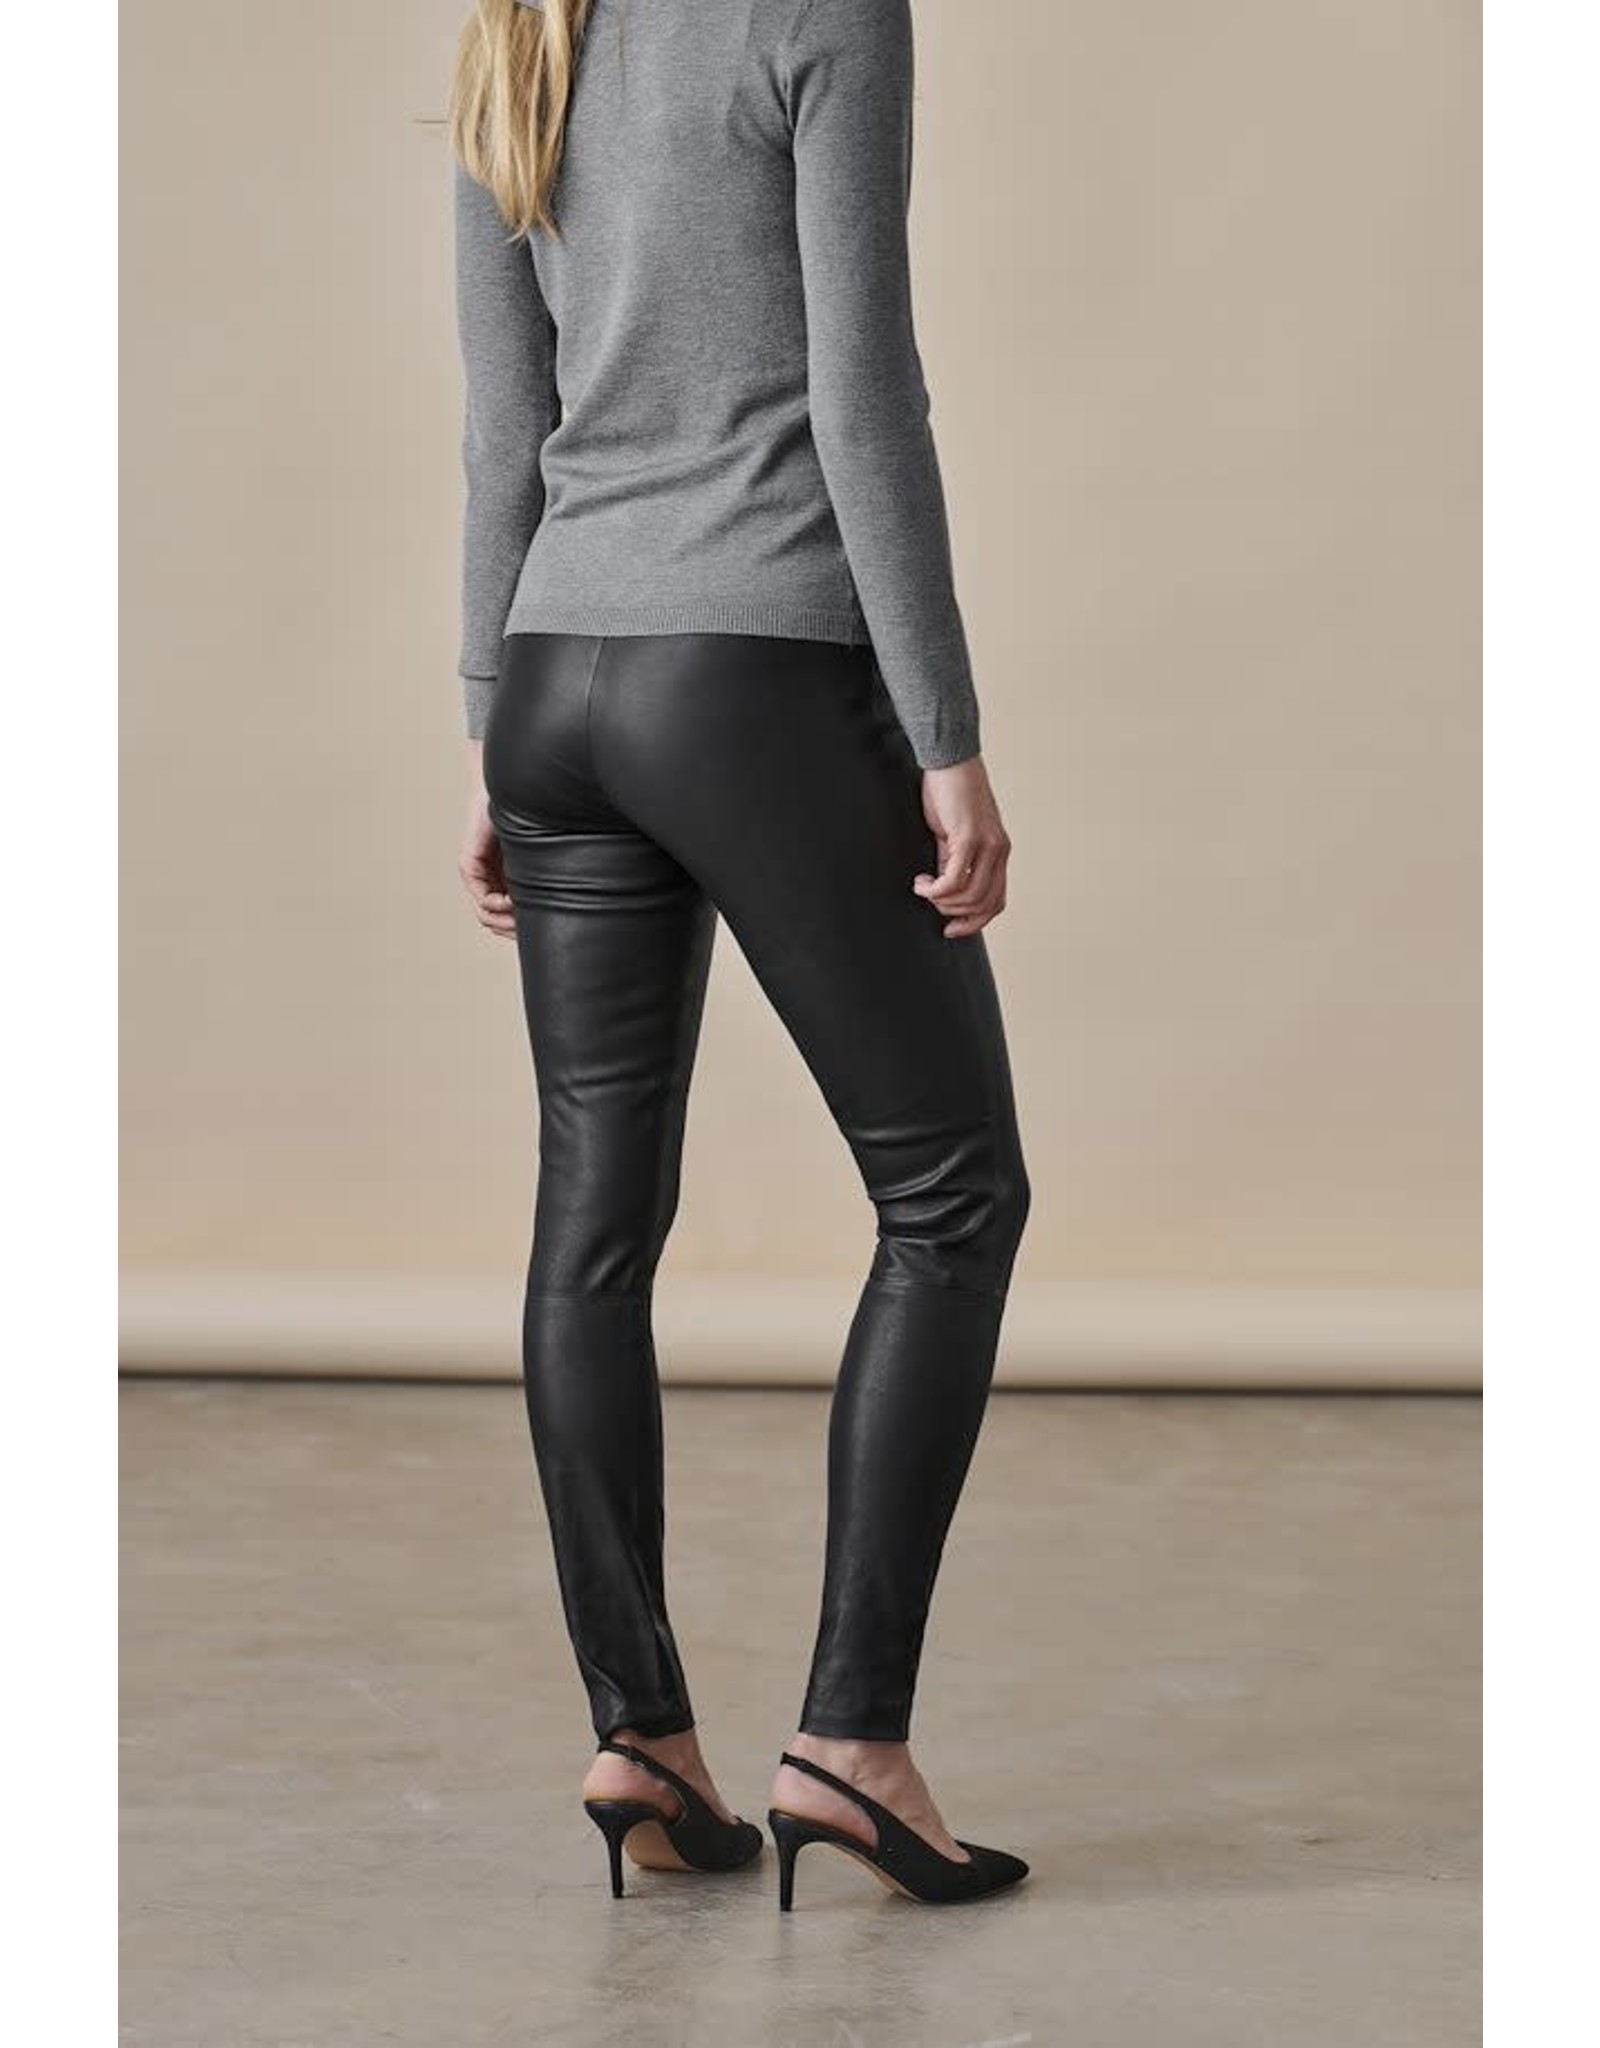 Culture Culture - Annemarie rollneck (mid grey)